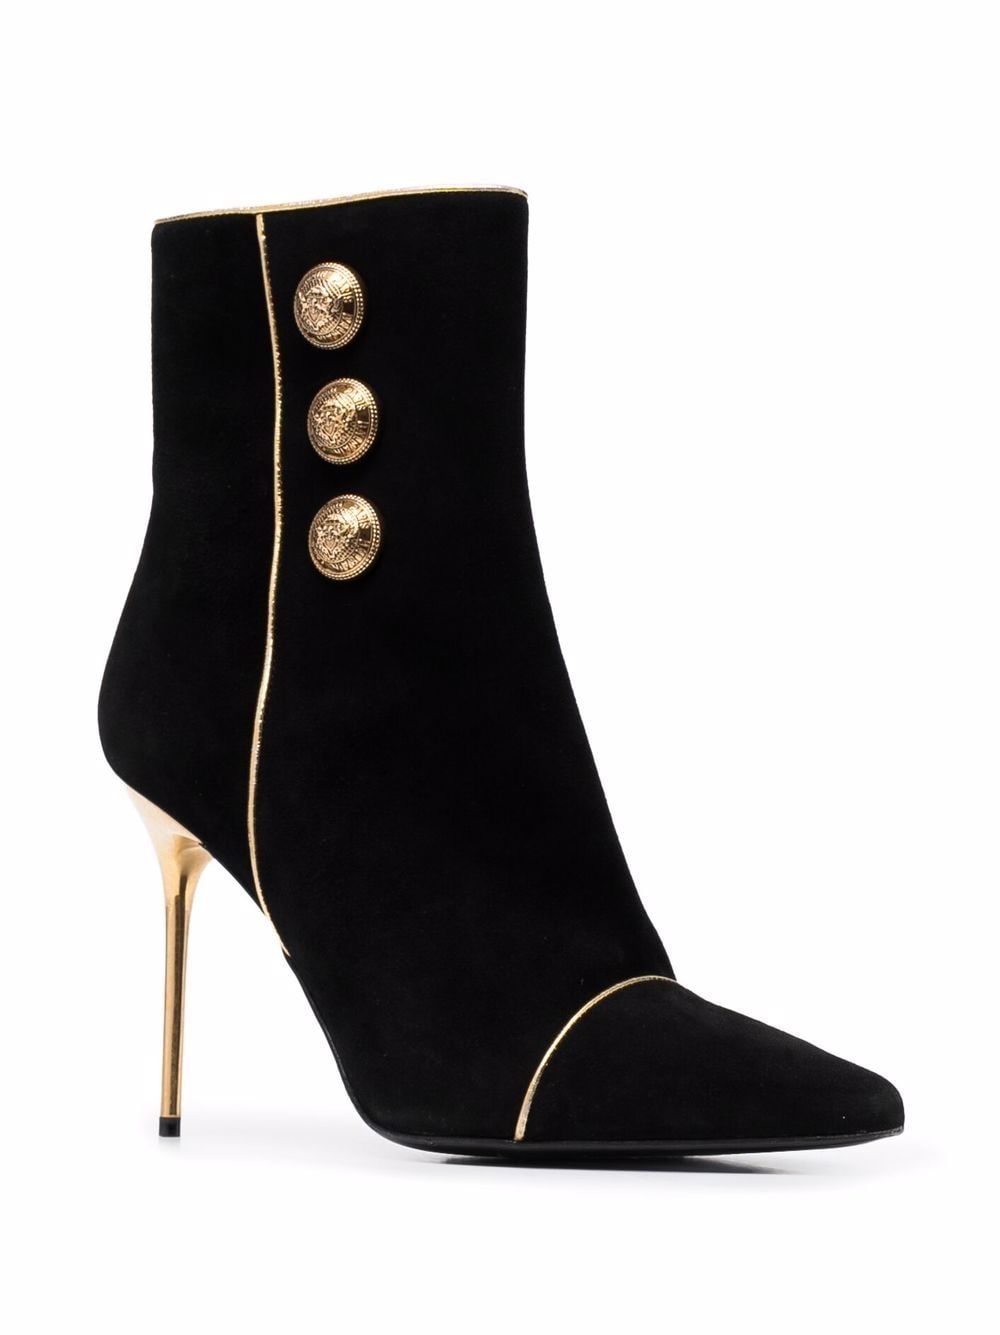 Balmain Robin Suede Ankle Boots In Black | ModeSens